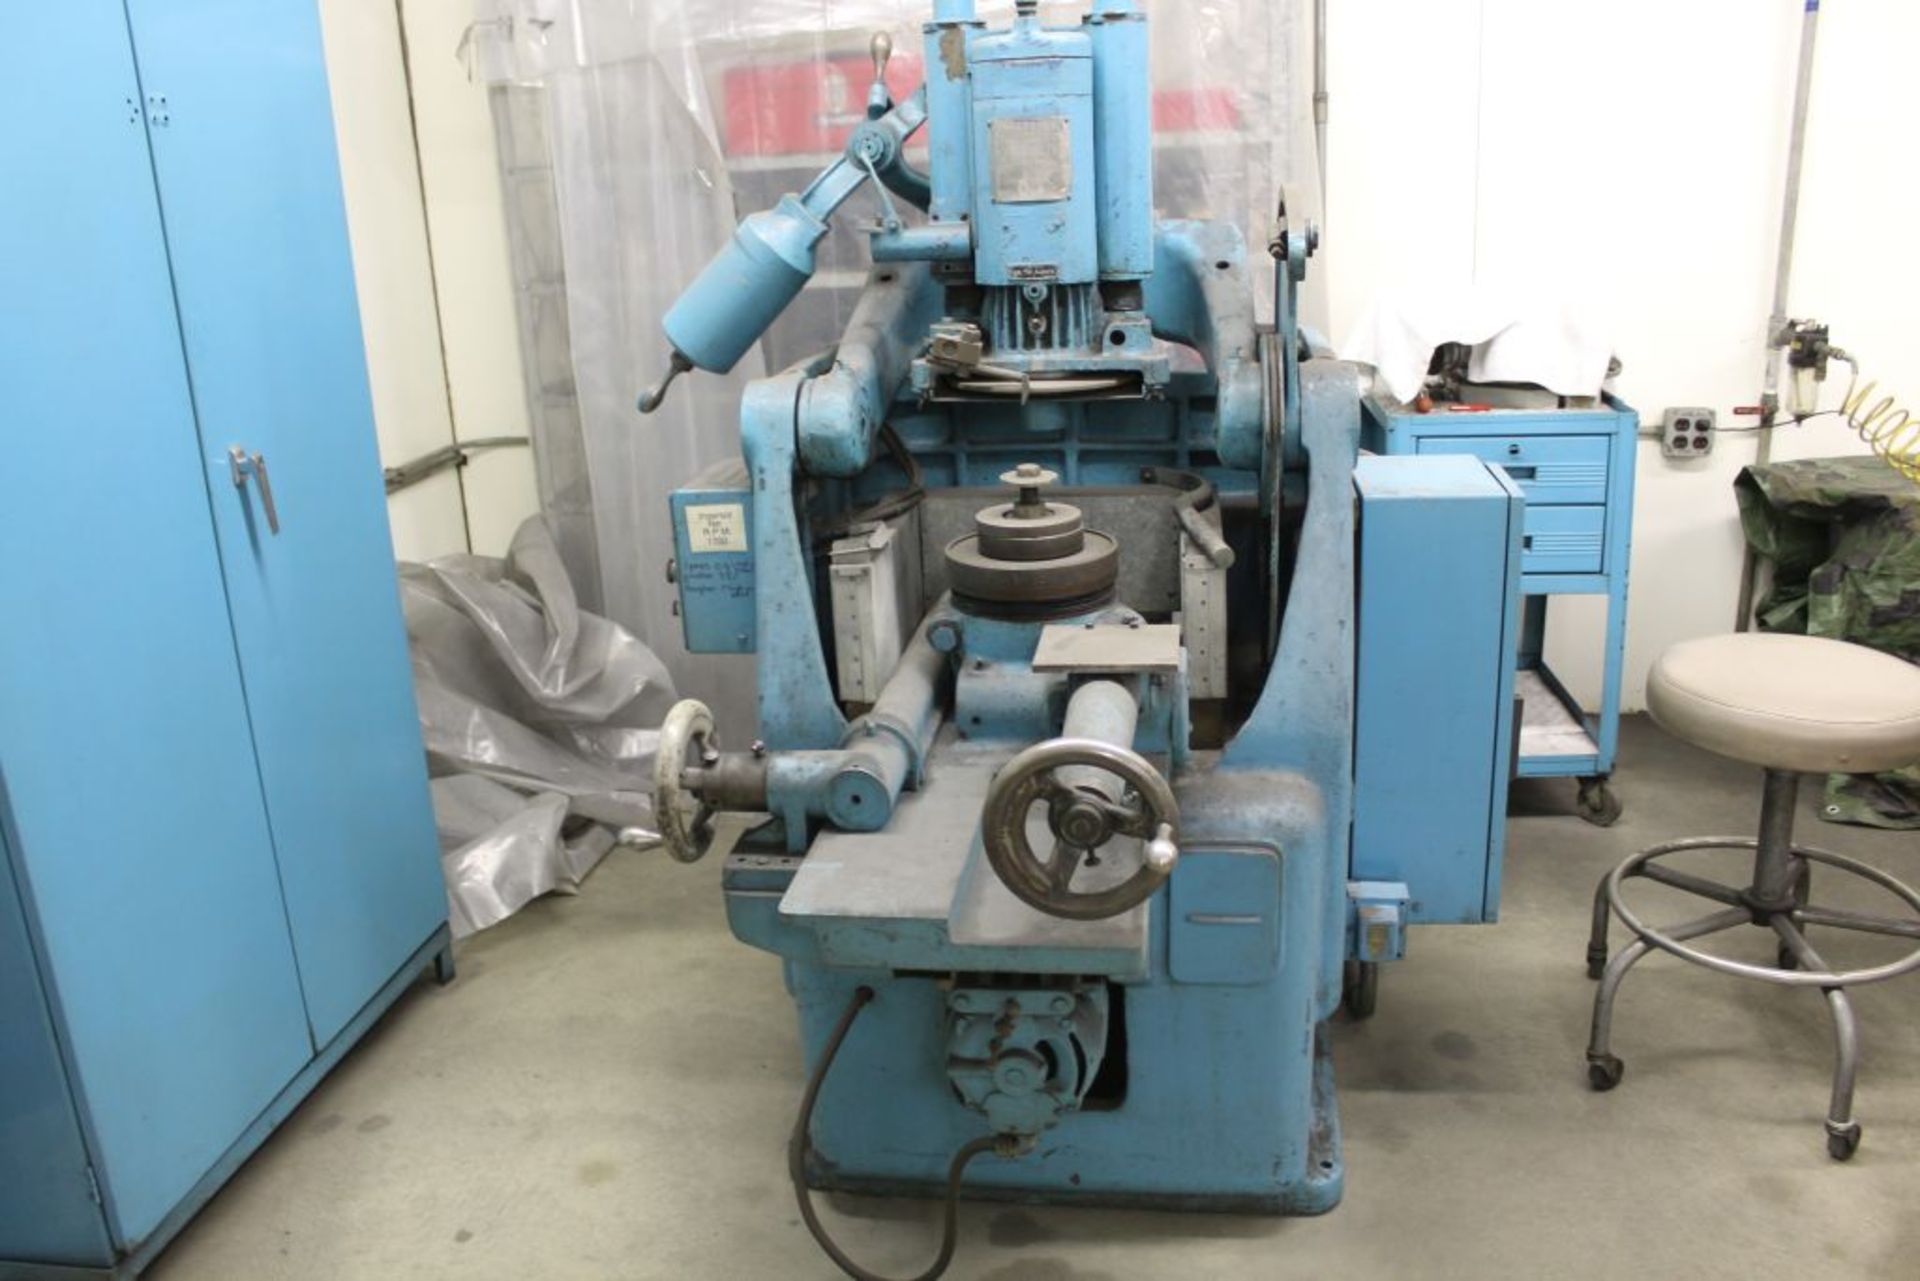 Ingersol tool & cutter grinder model and sn UNK.